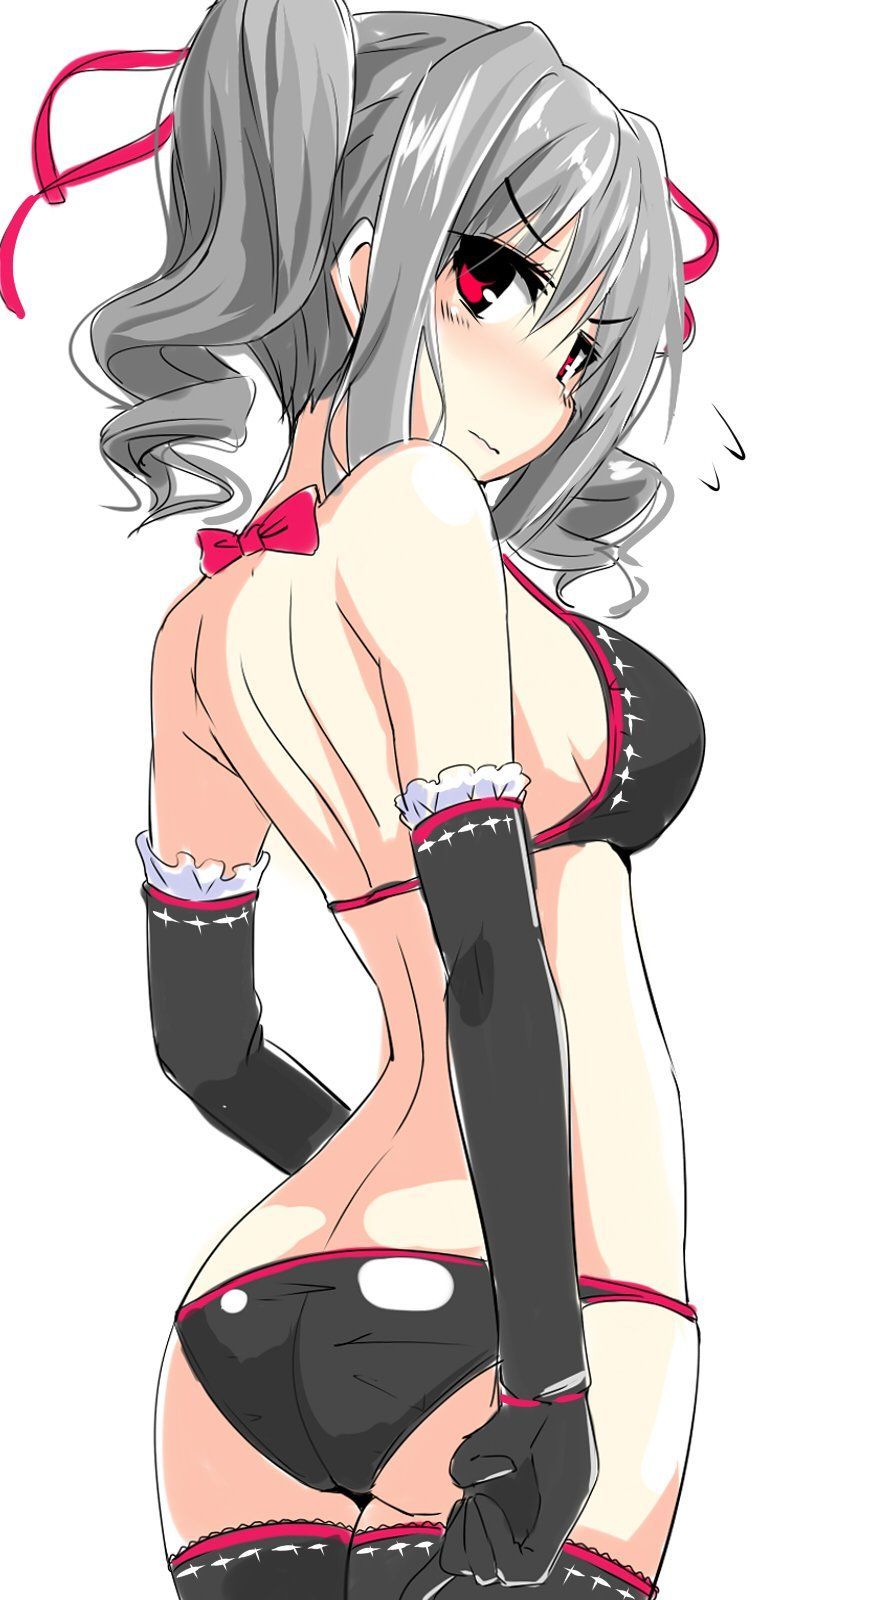 [Idol master] erotic missing image that has become the Iki face of Kanzaki Ranko 6